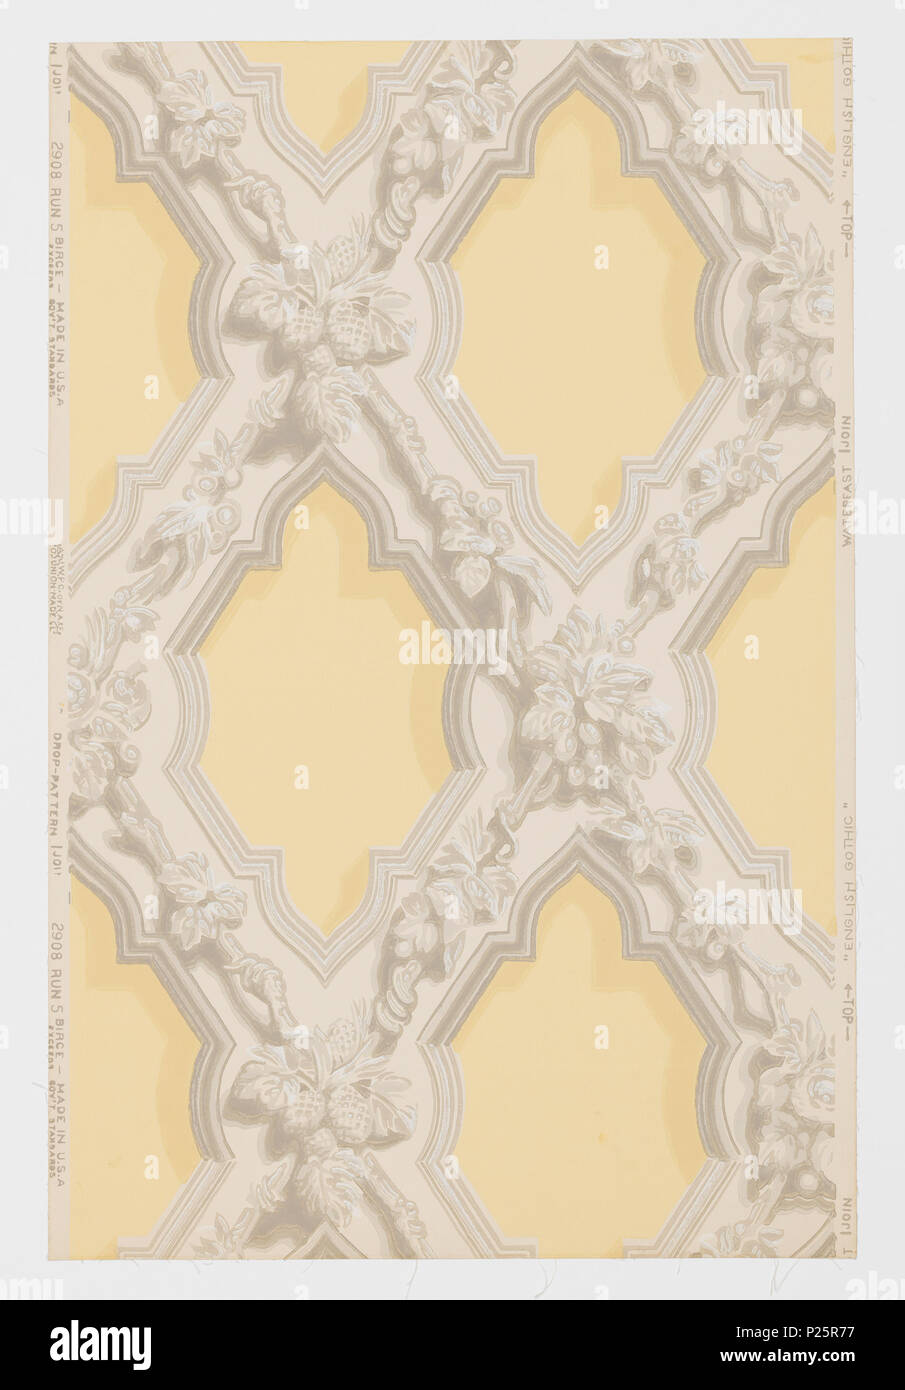 .  English: Sidewall, English Gothic, ca. 1915 .  English: Representing ornamental plaster form of decoration in English Gothic used in the first half of the 19th century. Composed of criss-crossing wide bands ornamented with leaves, flowers, nuts and fruits. Bands are edged with simulated moldings. A reproduction of an old wallpaper from the walls of the front entry of John Sible's house, Hancock Street, Salem, Massachusetts. It was put on walls in 1858. Printed on reverse side: 'No. 295 CB'. Printed in grisaille on pale gold field. Not original colors. . circa 1915 292 Sidewall, English Goth Stock Photo